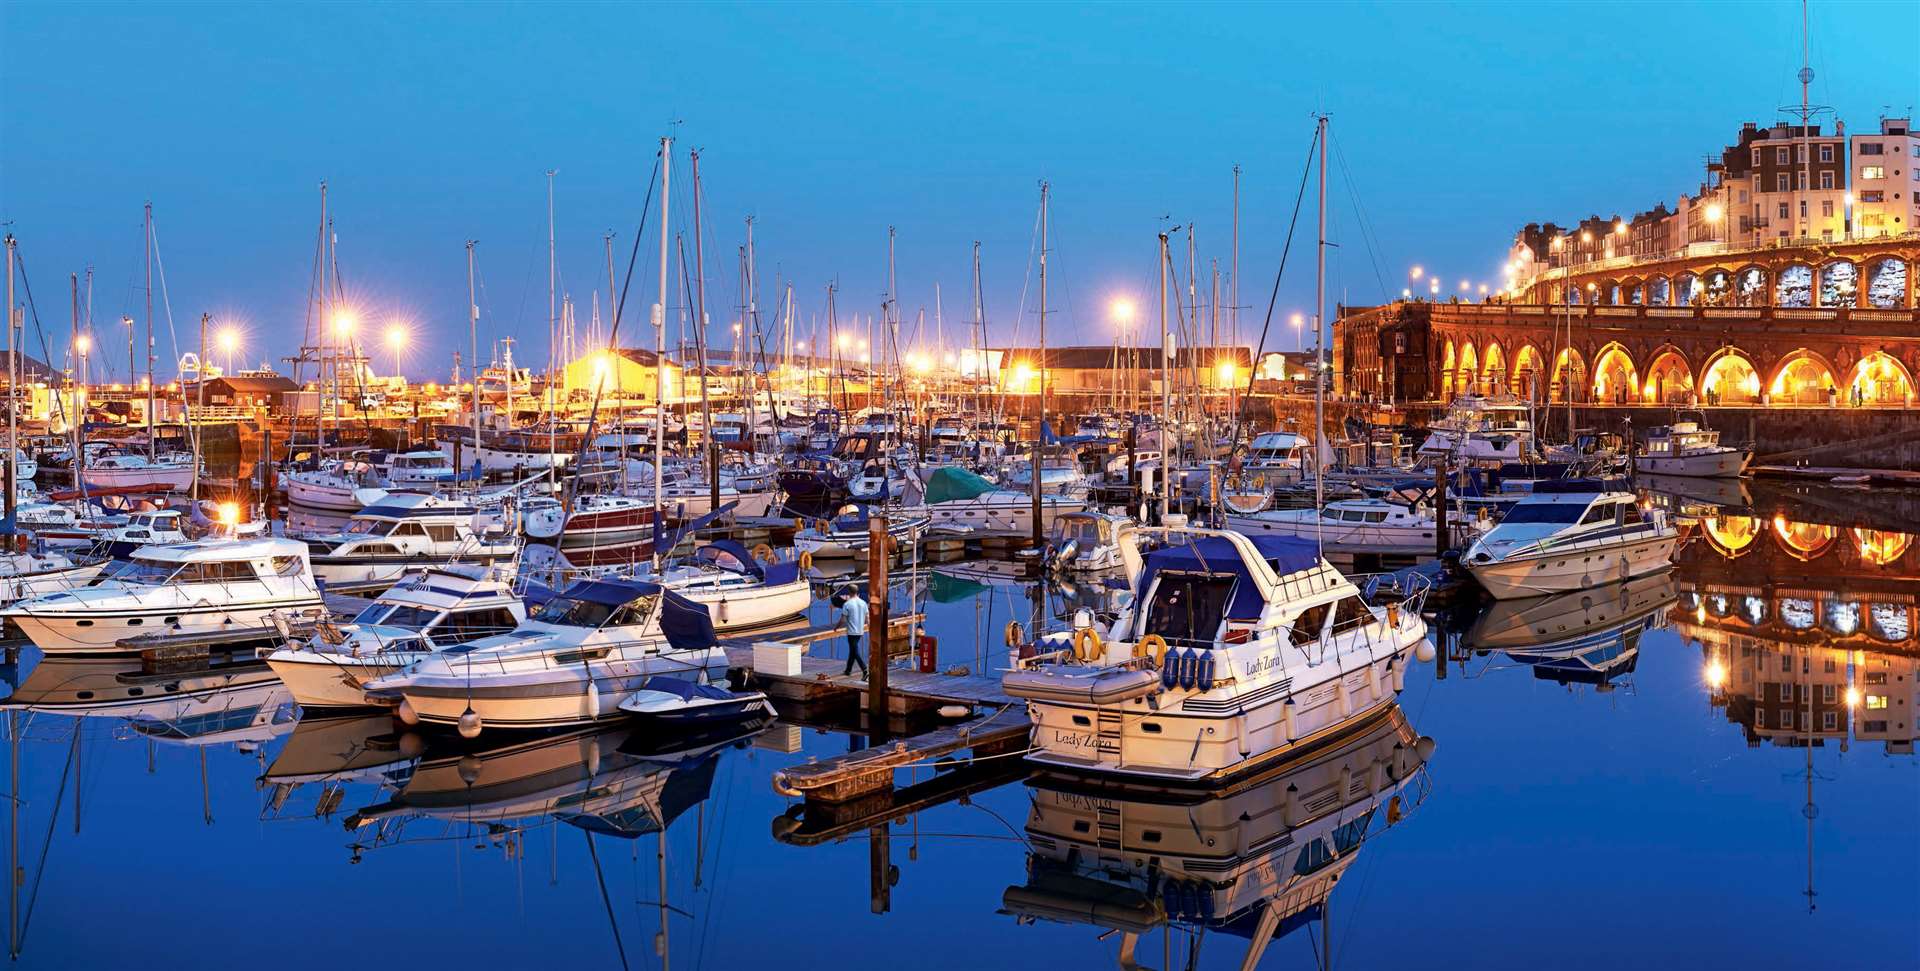 Ramsgate is one of the areas which saw the sharpest spike in house prices since the pandemic. Picture: Visit Kent